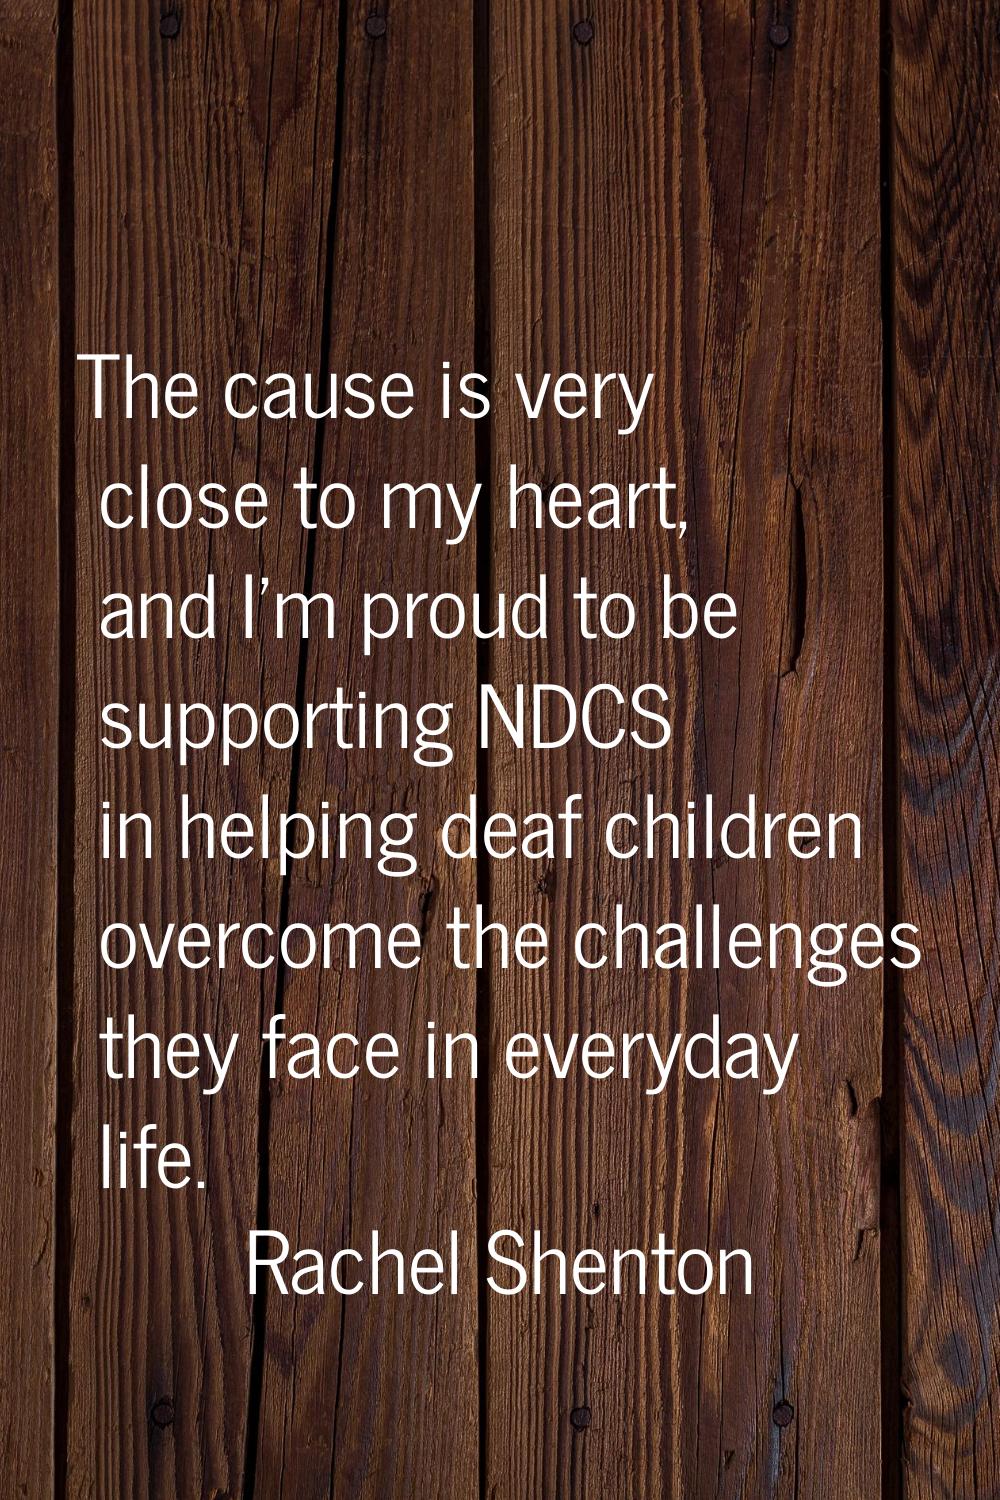 The cause is very close to my heart, and I'm proud to be supporting NDCS in helping deaf children o